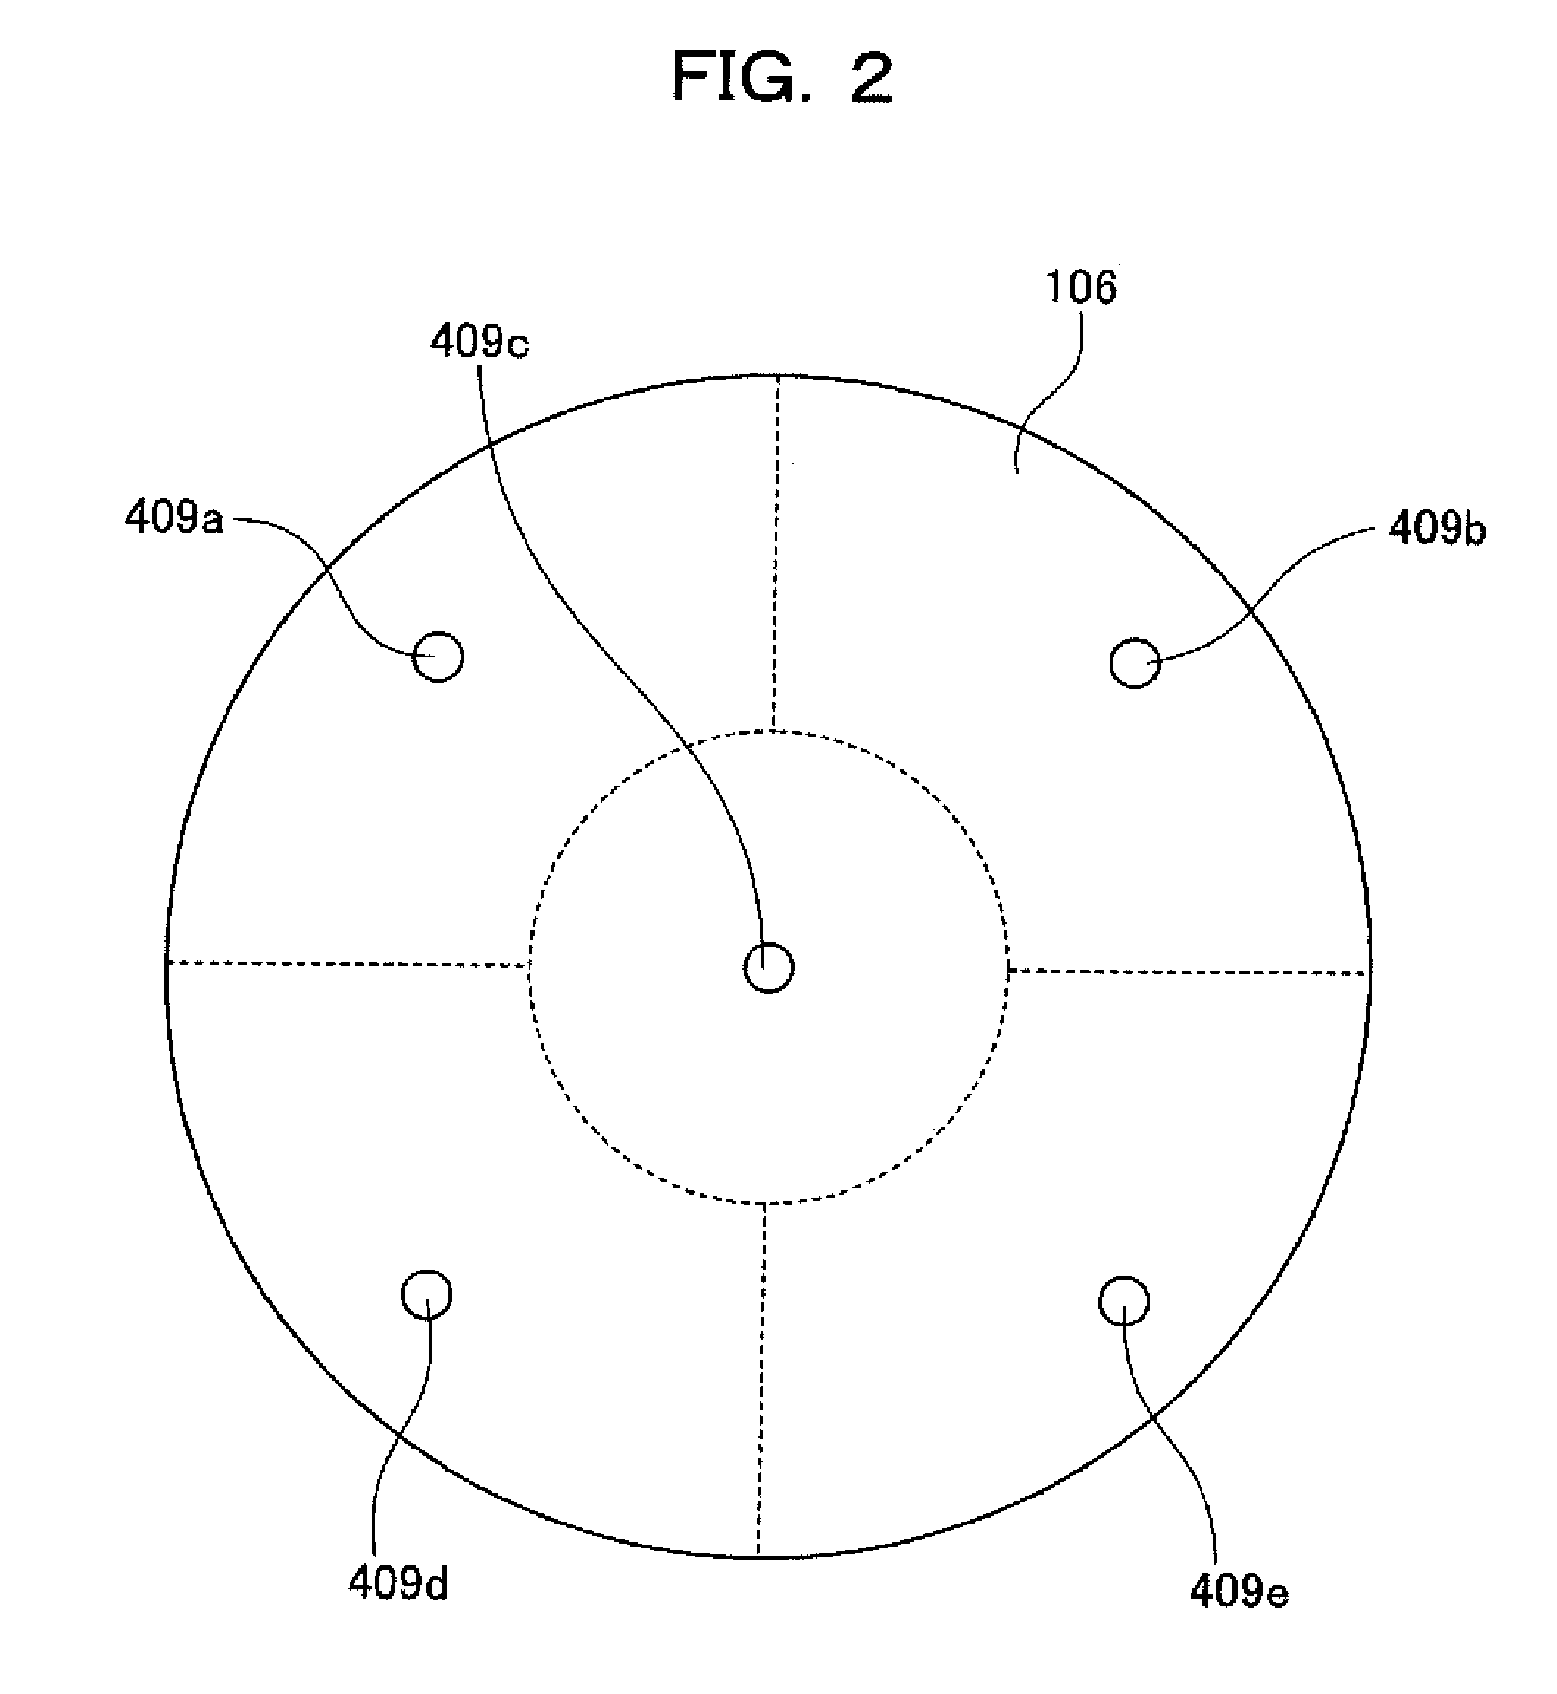 Wafer-level burn-in method and wafer-level burn-in apparatus